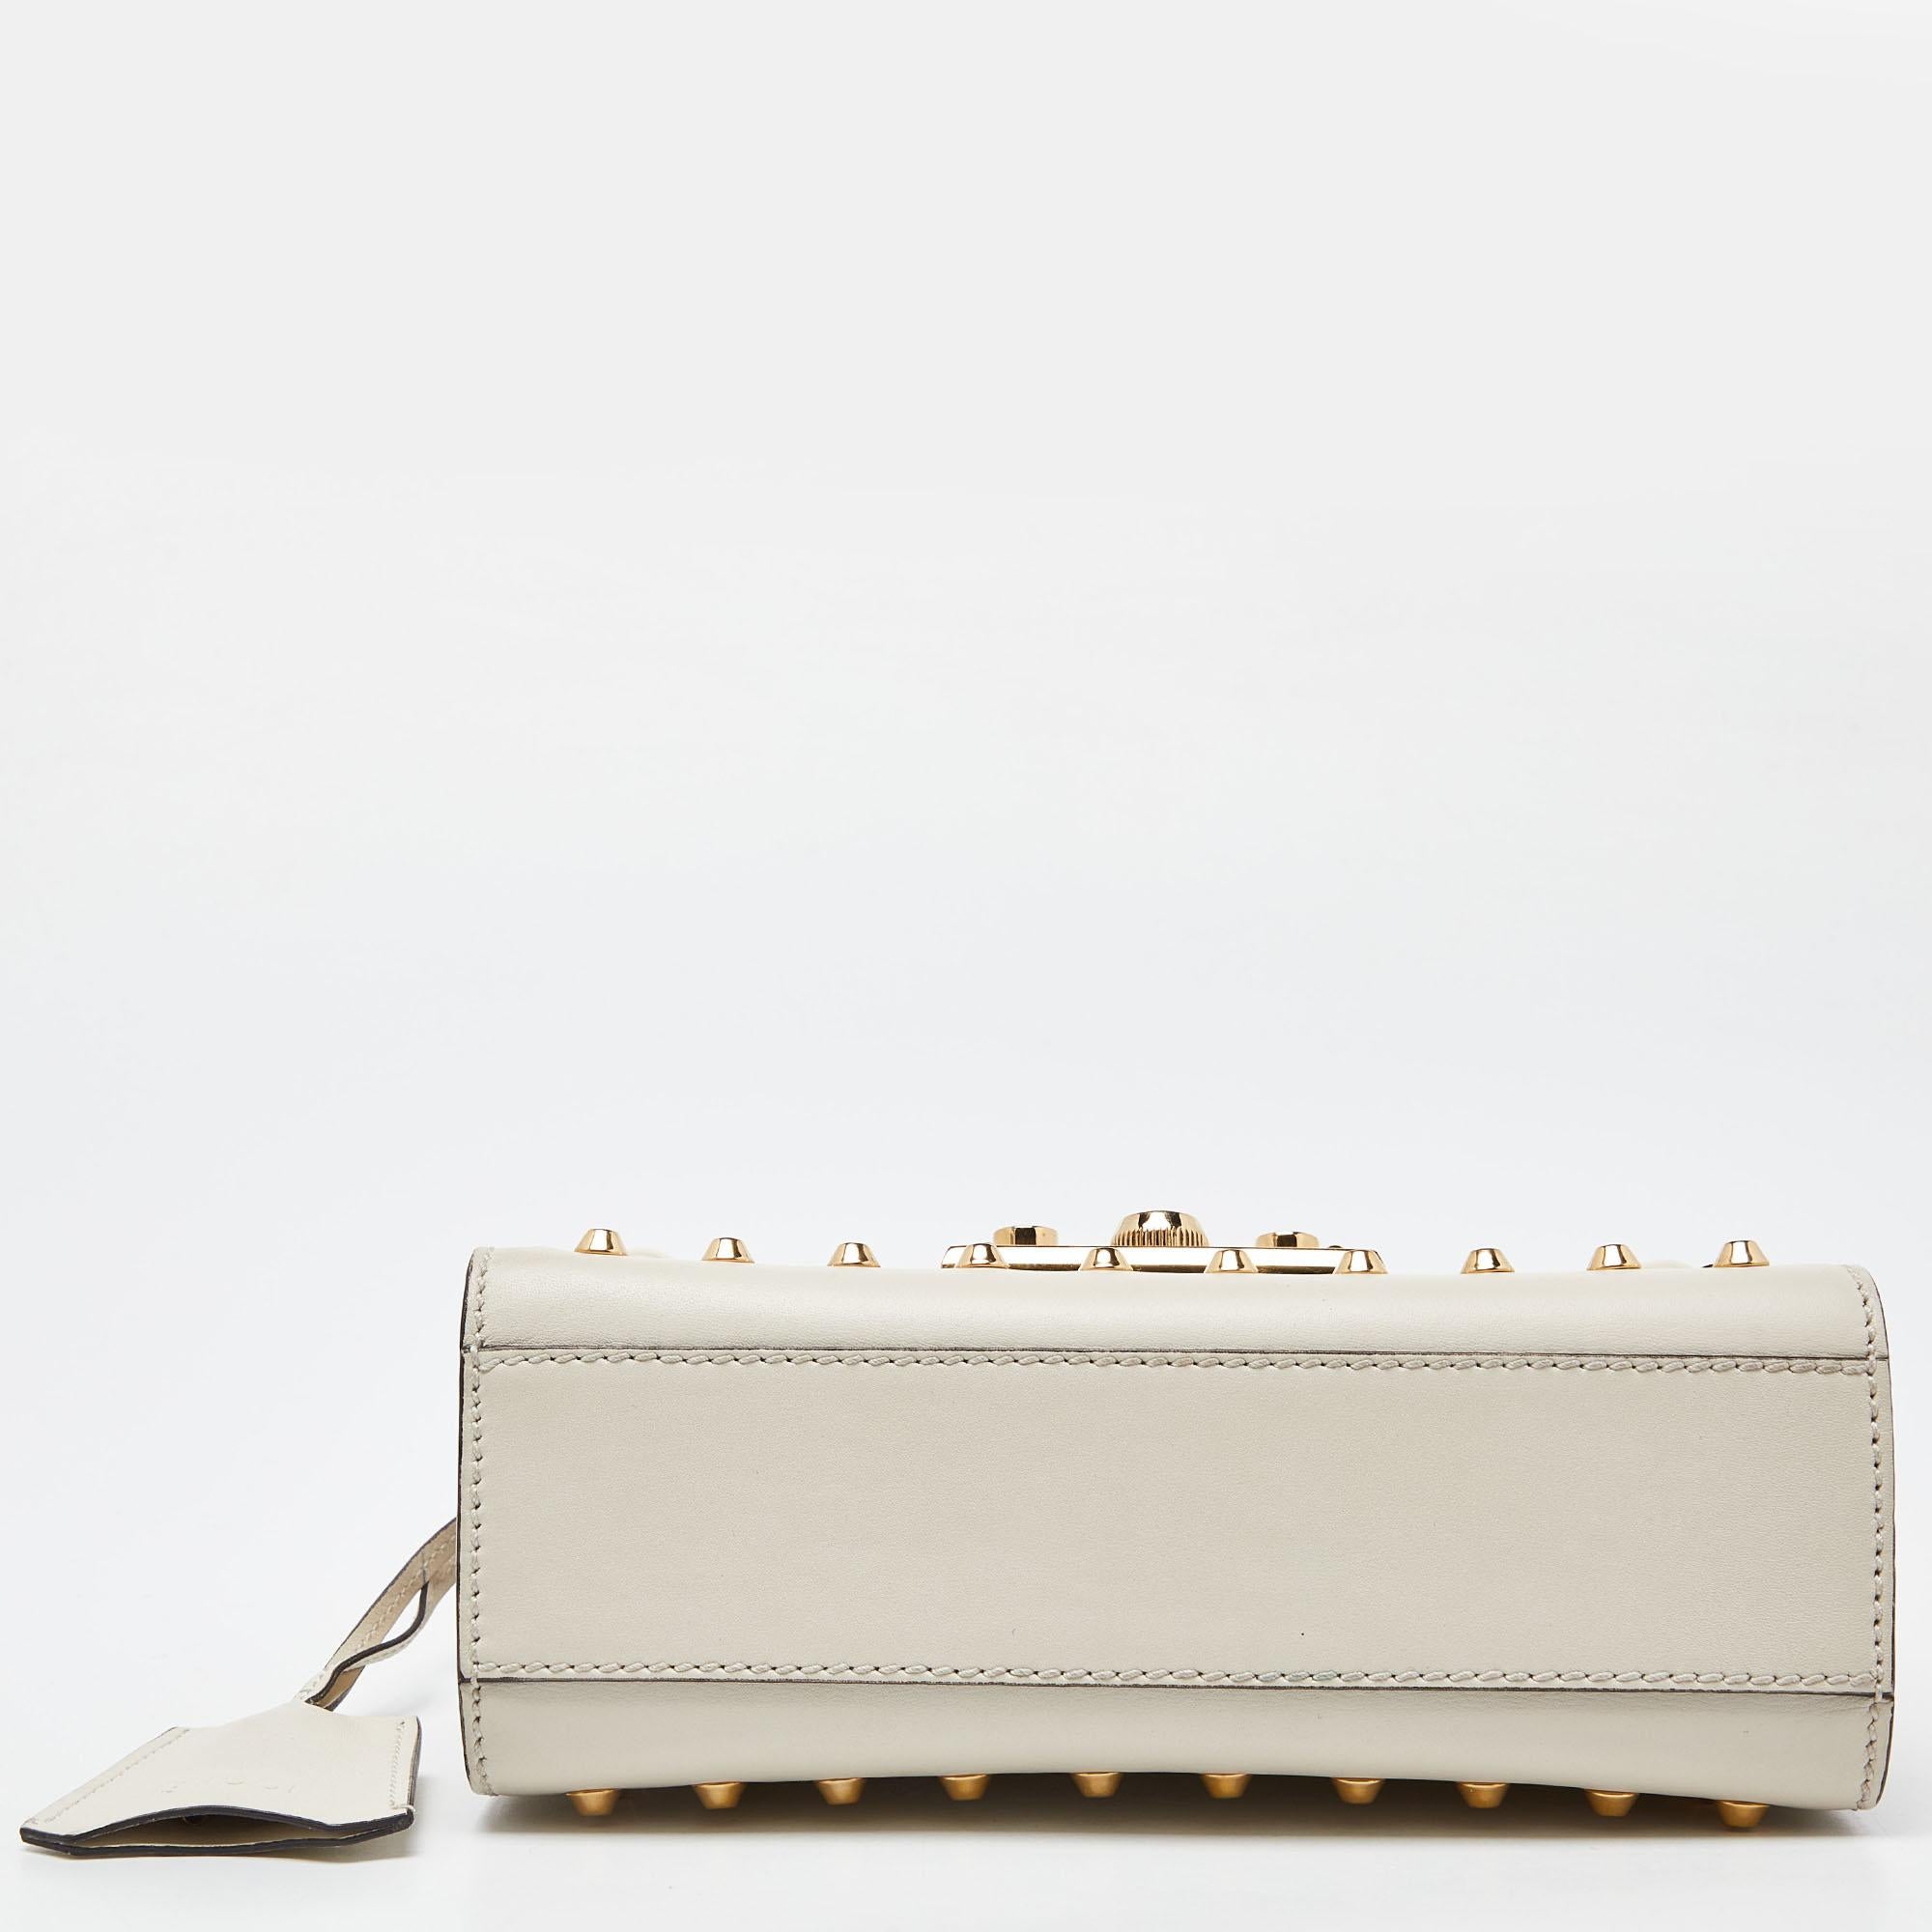 Gucci Beige Leather Small Pearl Studded Padlock Shoulder Bag For Sale 8